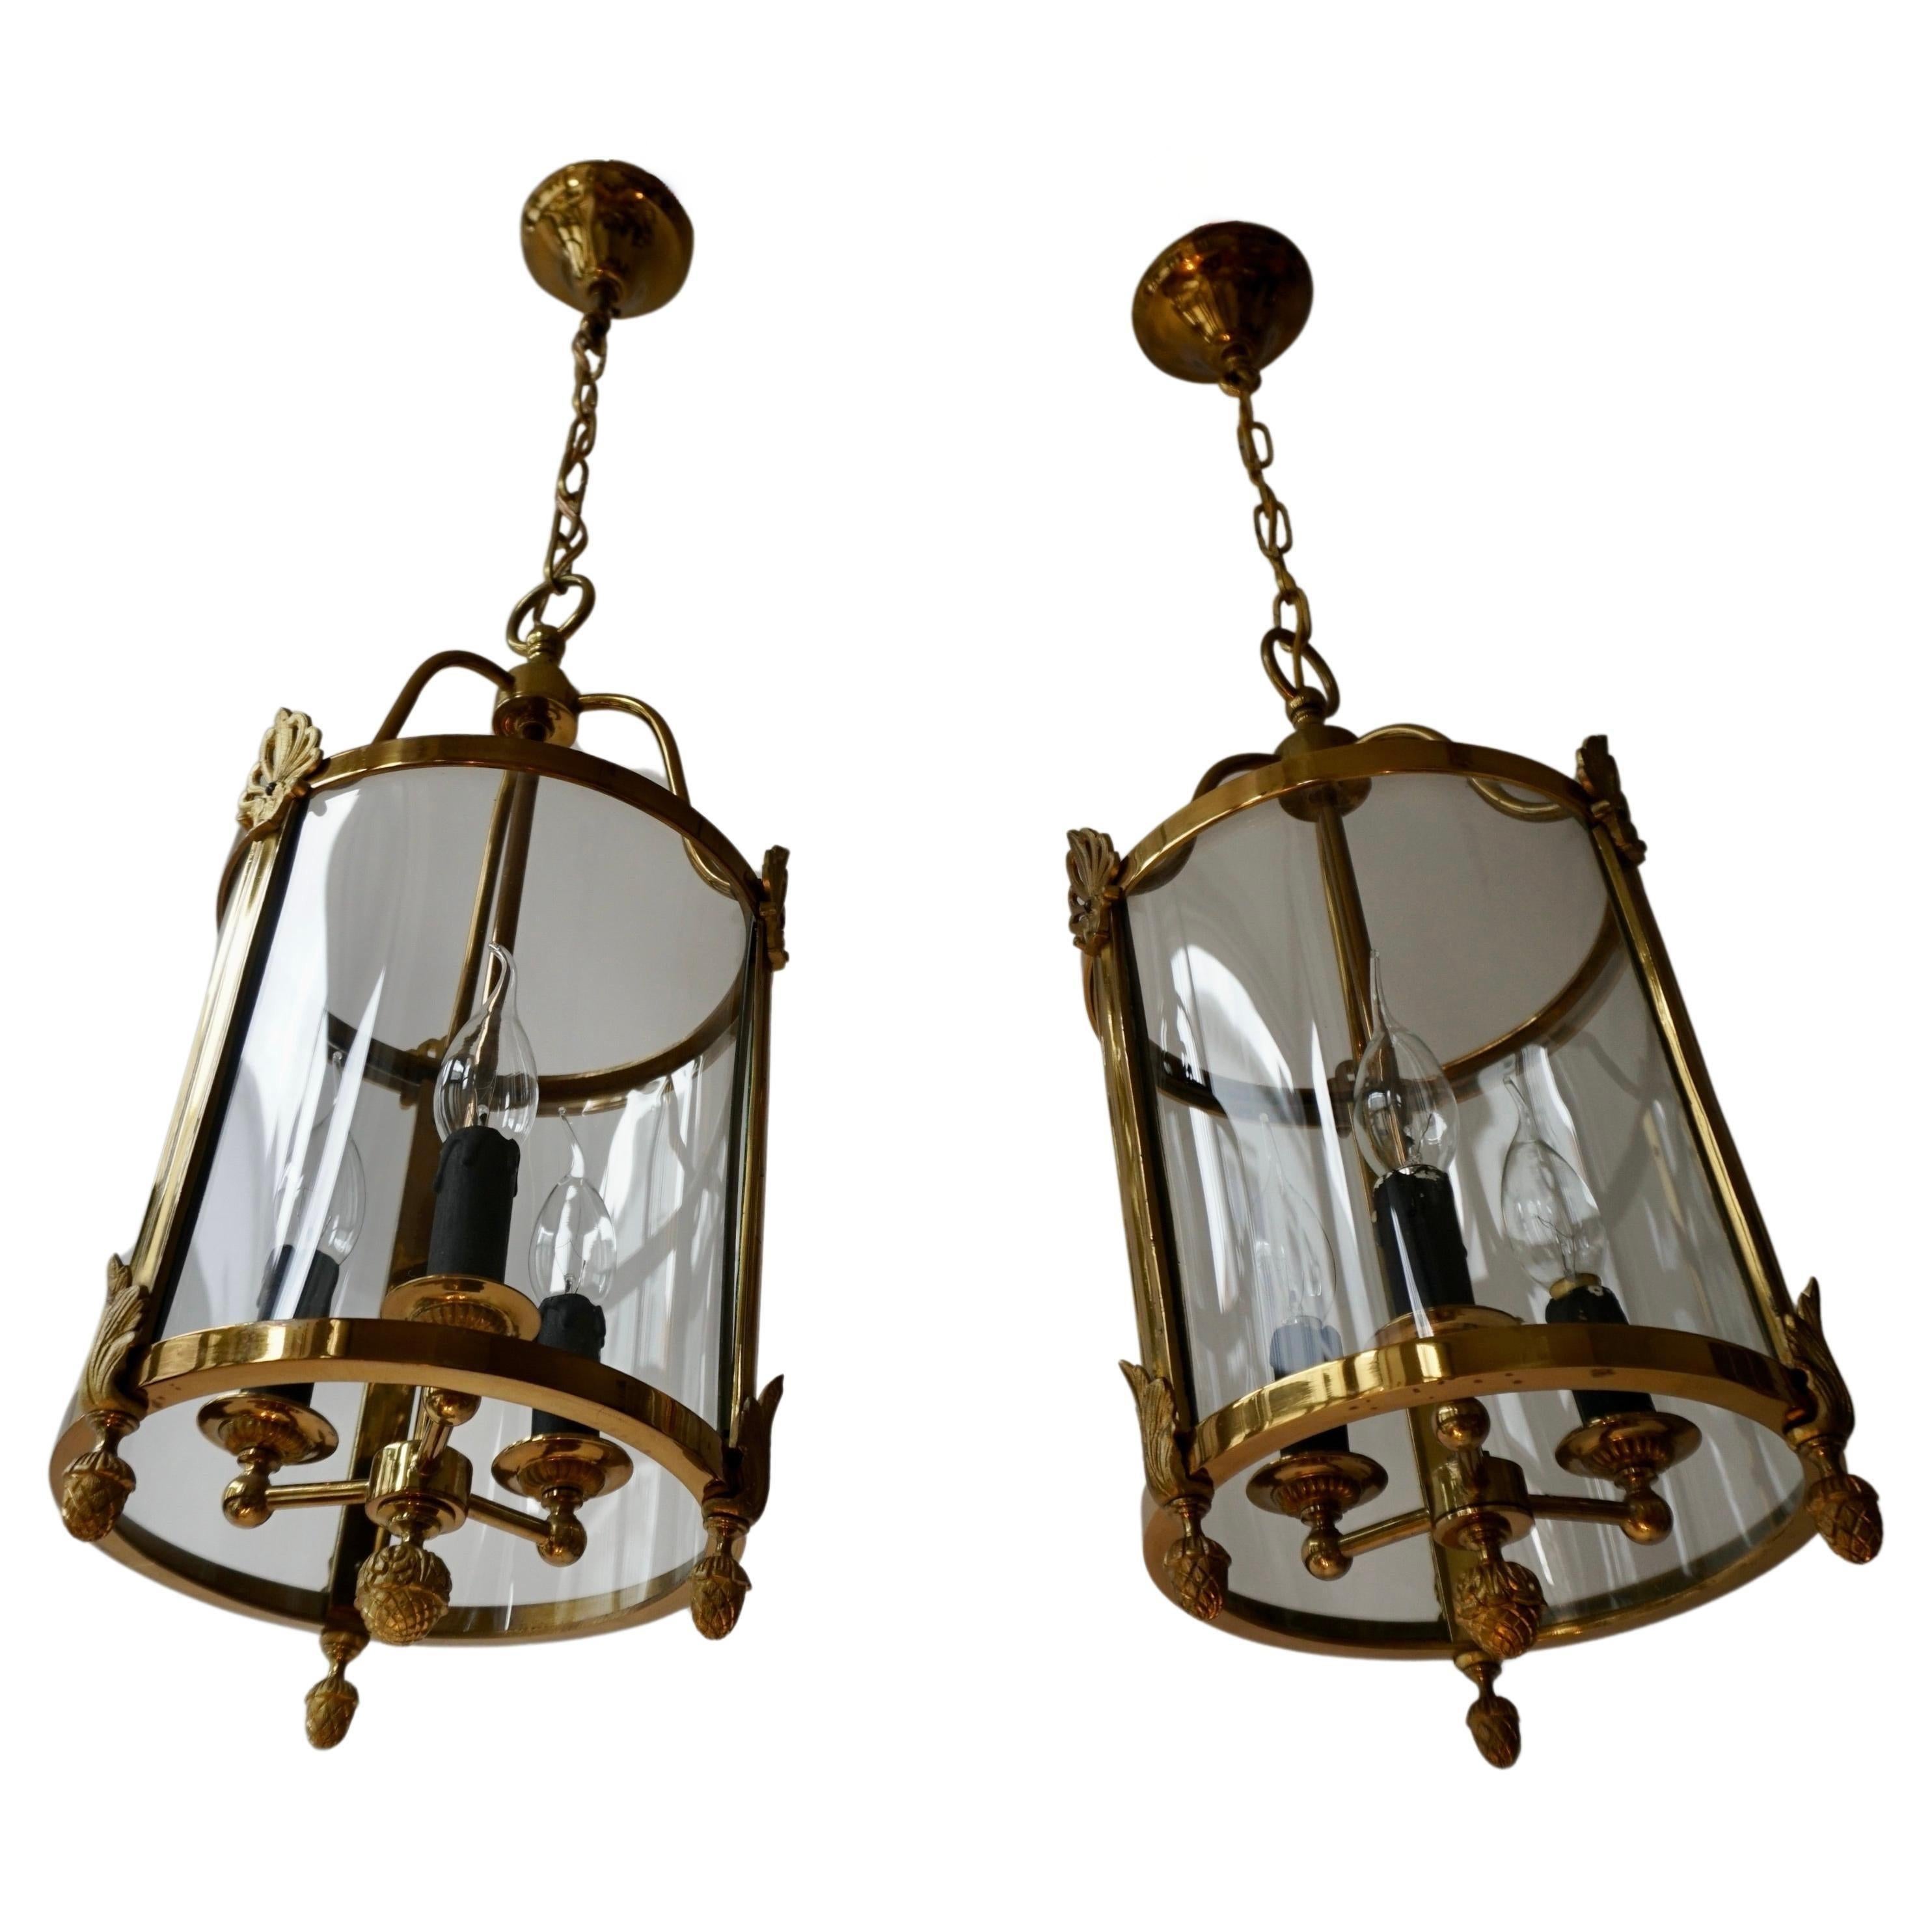 A petite French pair of brass lanterns with curved glass panels and decorated with pine cones and stylized.
In perfect working condition.
France.
First half of the 20th century

The lamp has three sockets for small incandescent lamps with screw base